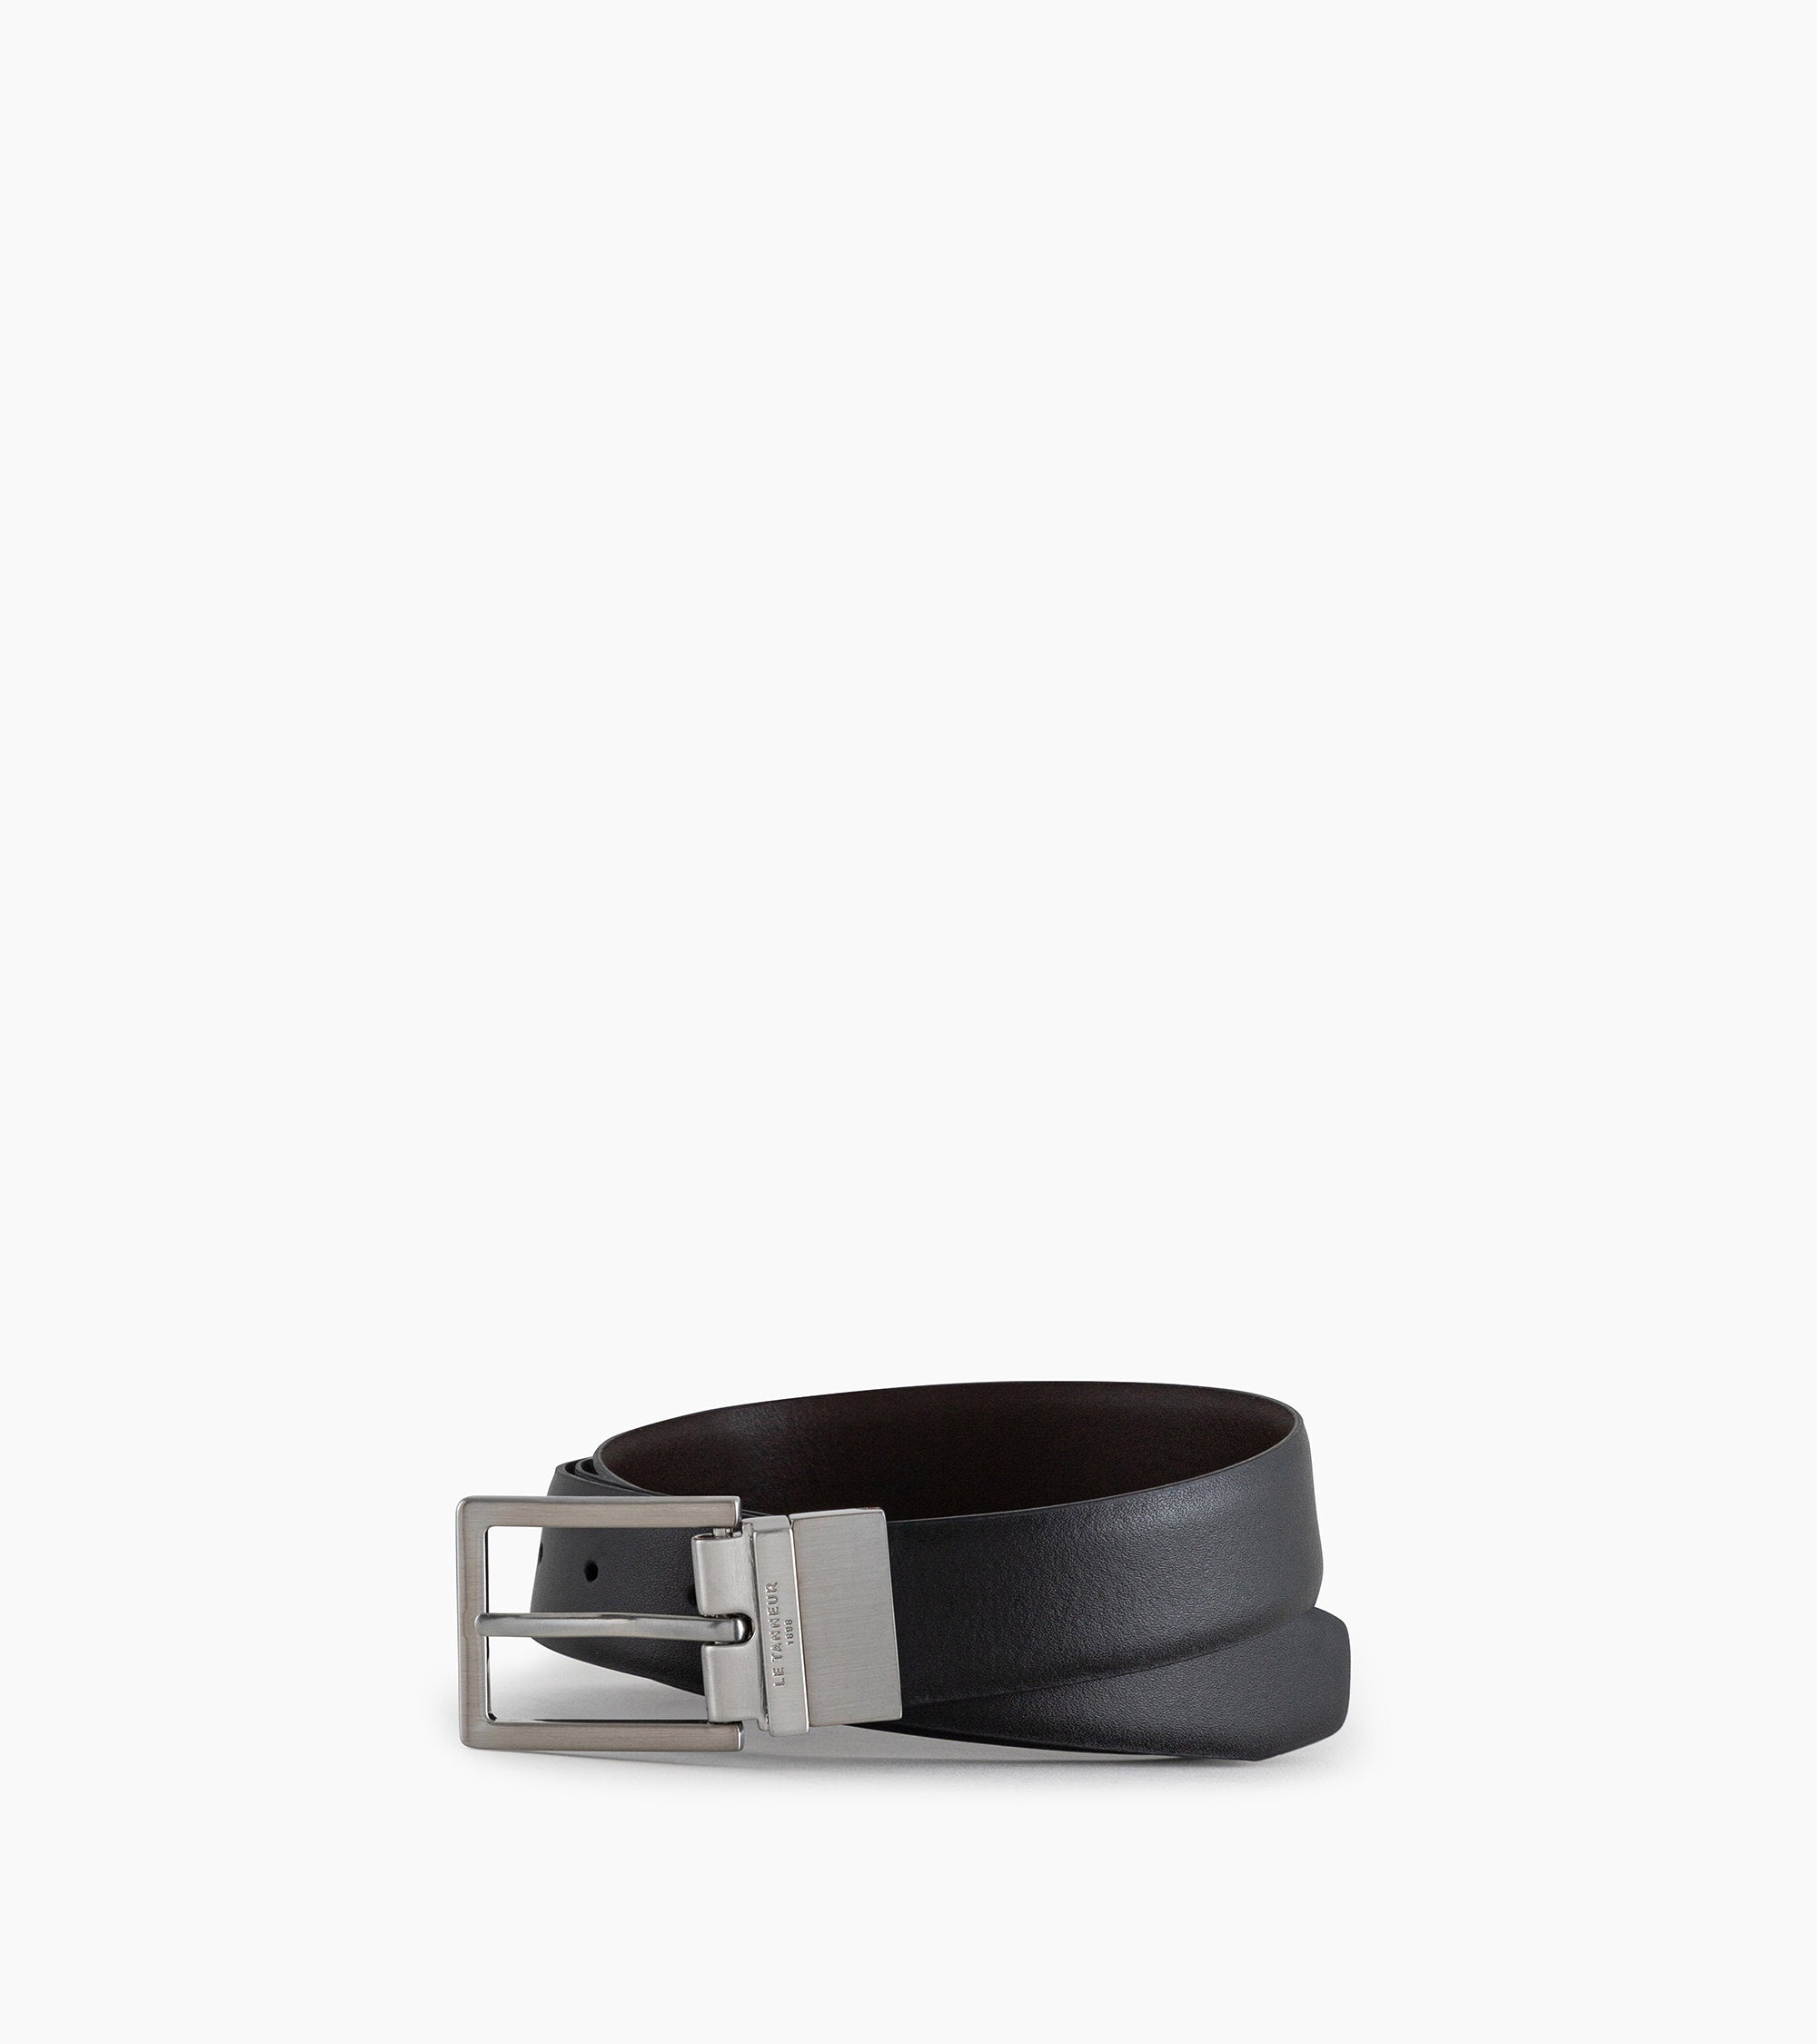 Classic smooth leather men's belt with square buckle